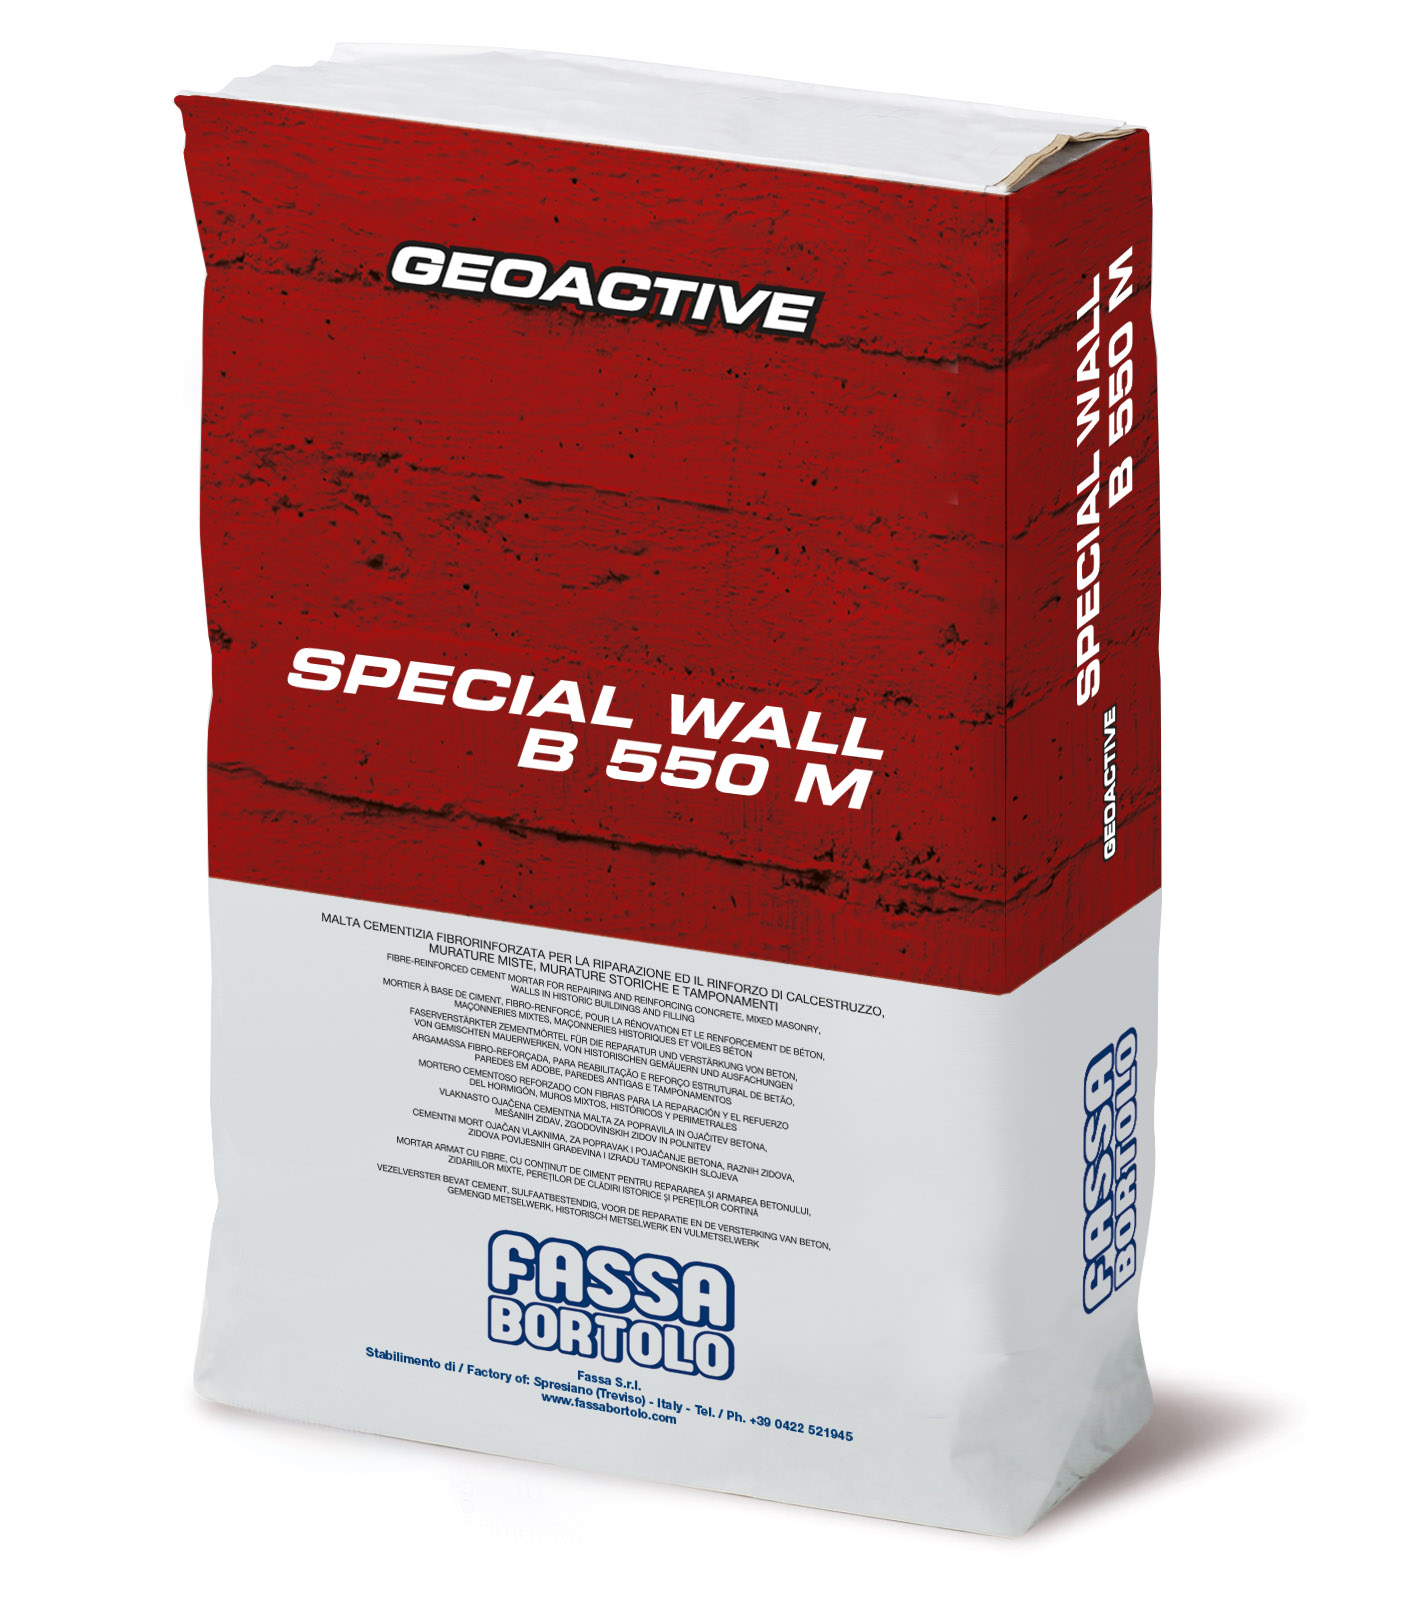 SPECIAL WALL B 550 M: One-component thixotropic, fibre-reinforced cement spray mortar with controlled shrinkage, containing sulphate-resistant cement, for repairing and reinforcing concrete and mixed masonry structures, walls in historic buildings and filling